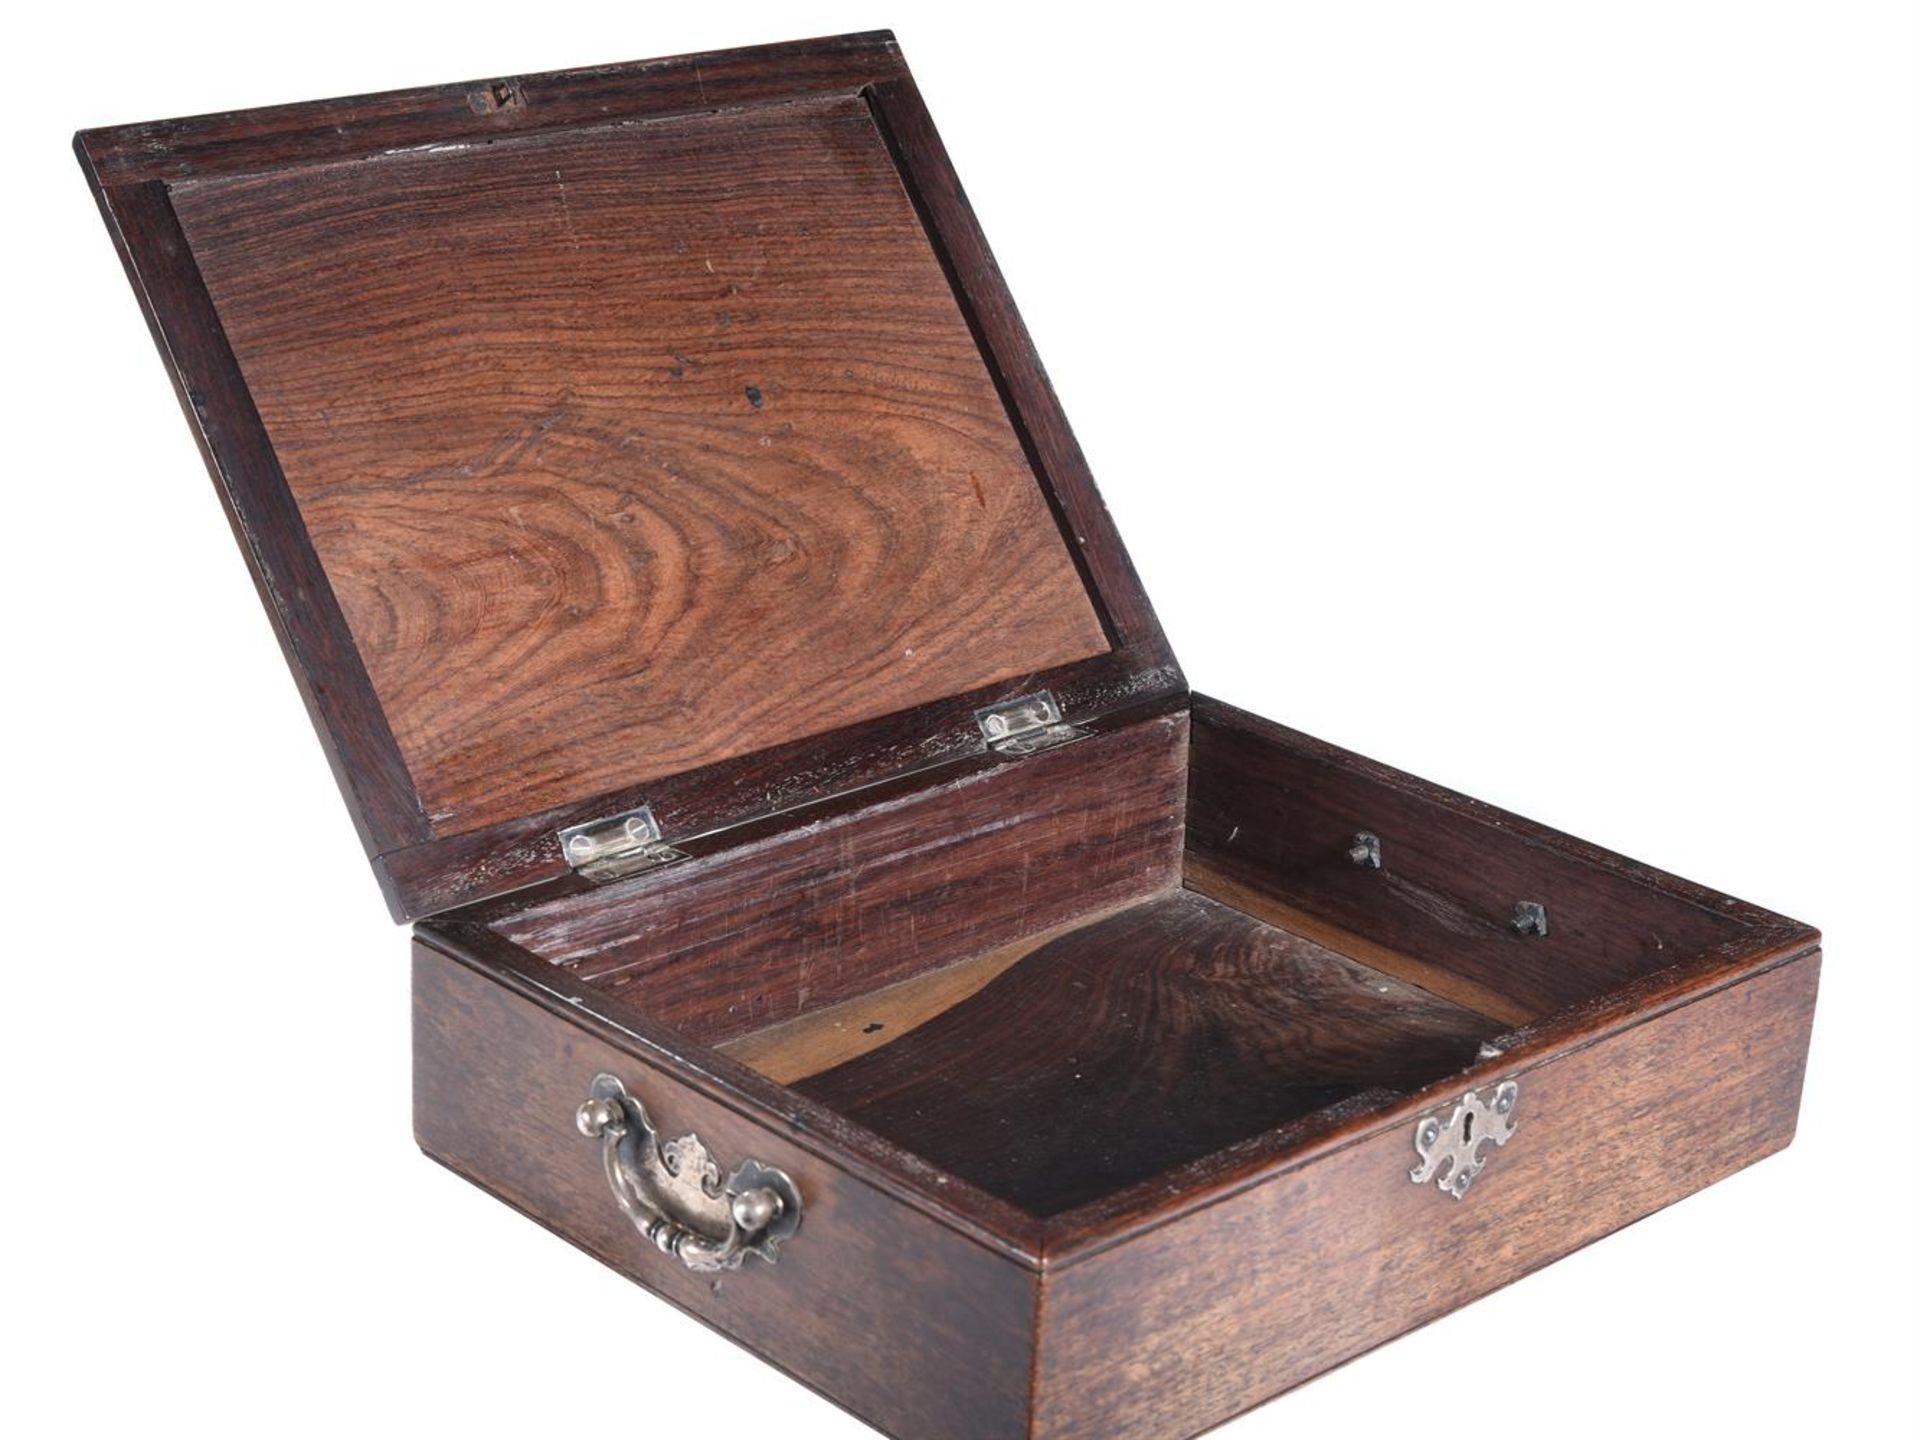 Y A CHINESE EXOTIC HARDWOOD AND PAKTONG MOUNTED DOCUMENT BOX, 18TH CENTURY - Image 4 of 4